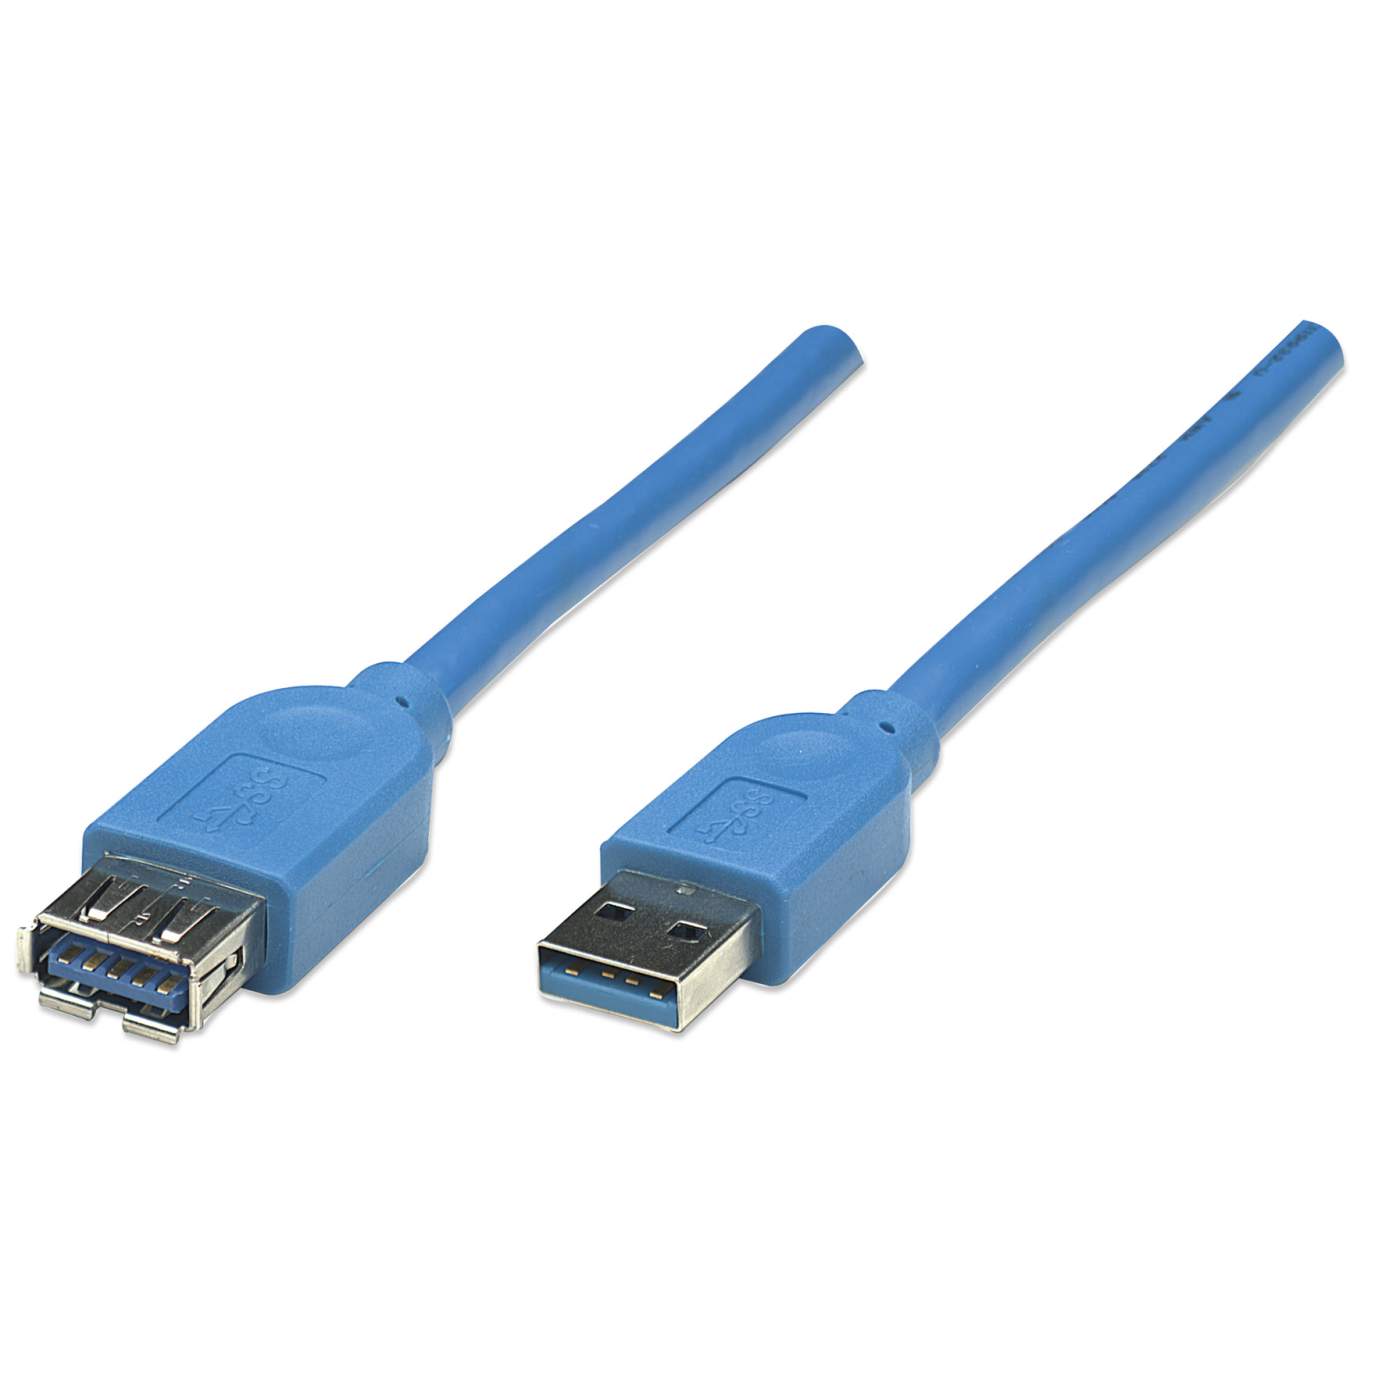 USB 3.0 Type-A Extension Cable